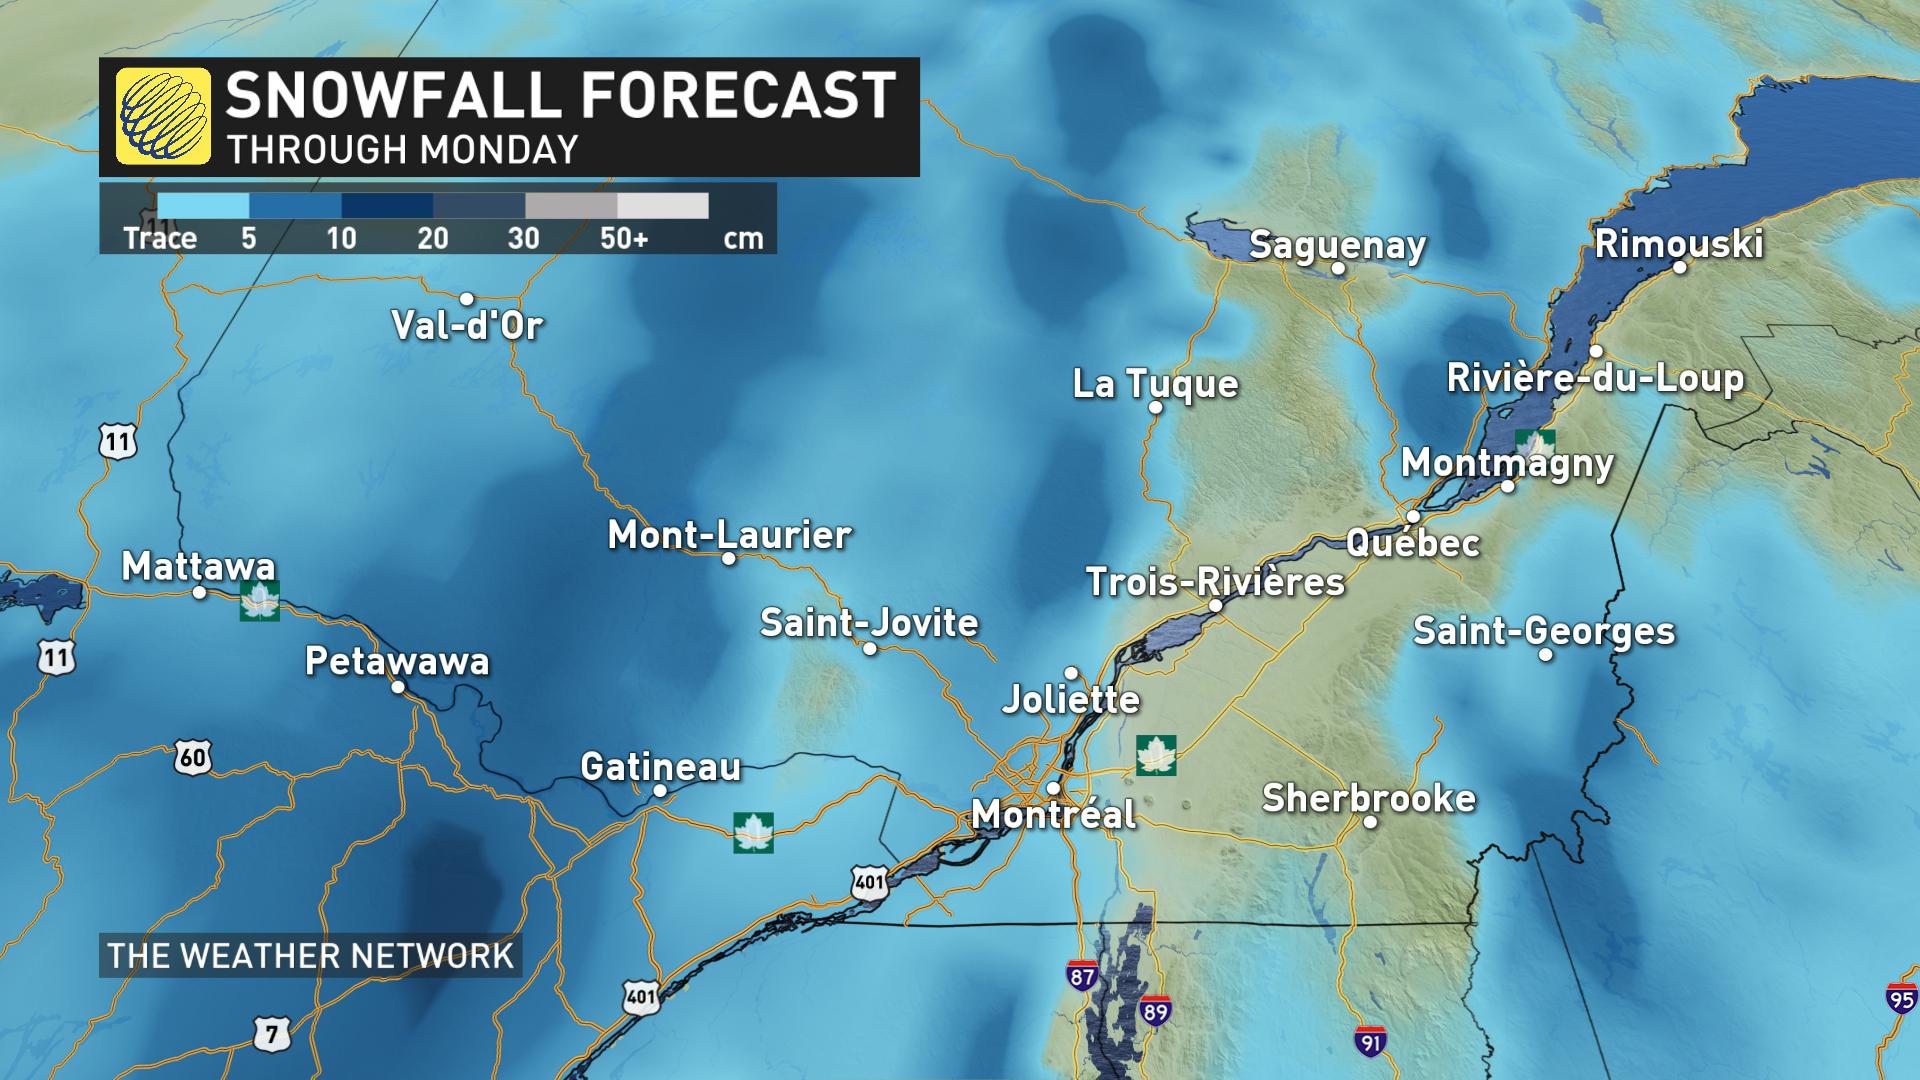 By Monday, the storm will be spinning over northern Quebec, but the